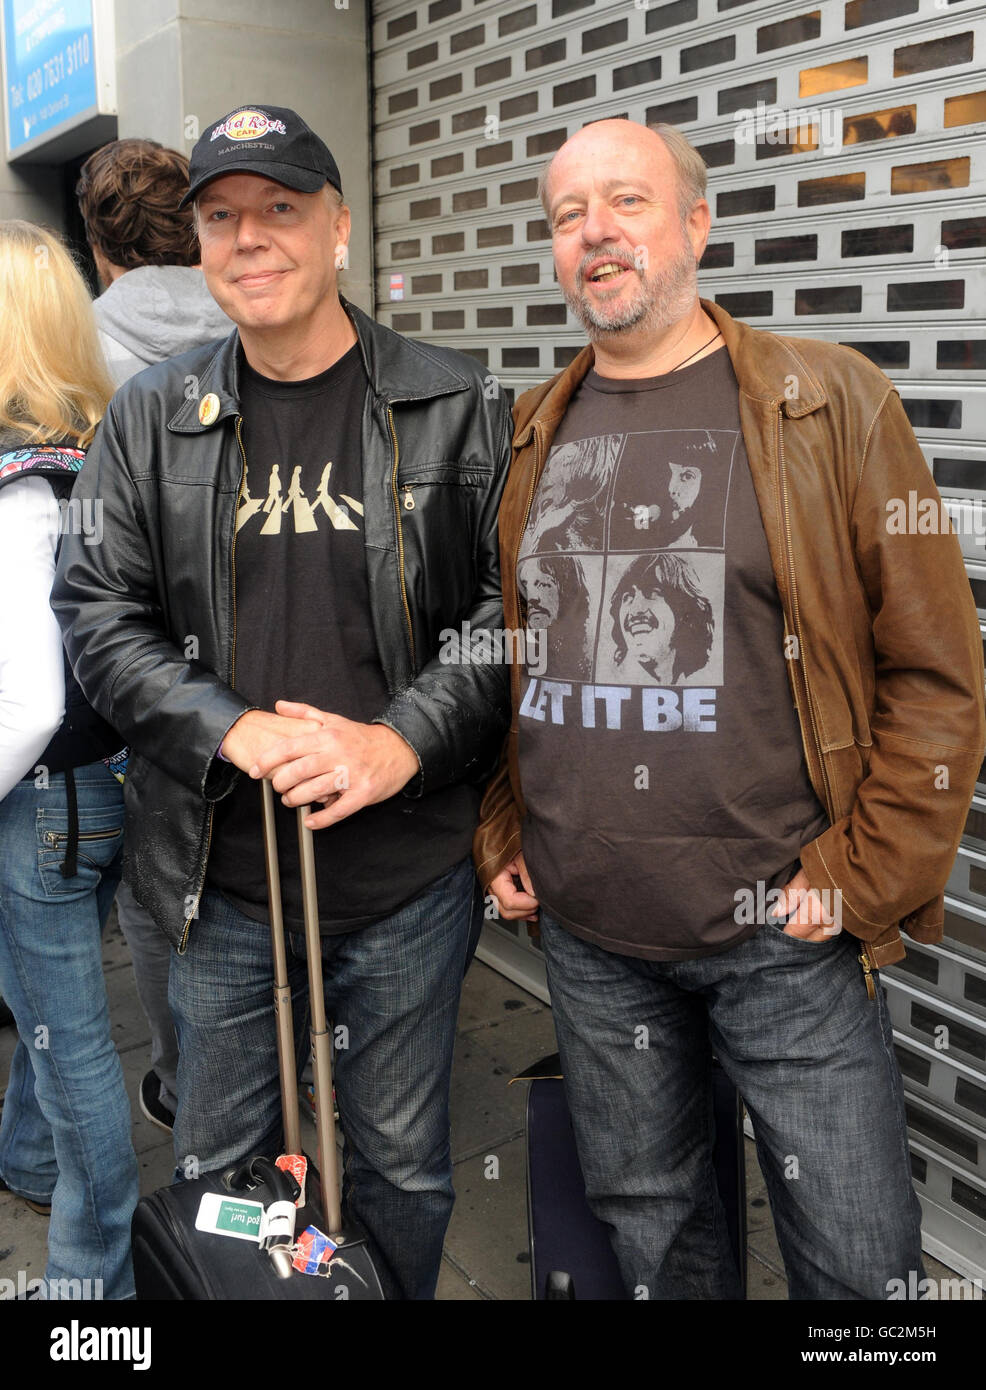 Beatles fans, Lars Jensen (left) and Tom Hugo Sorensen, both from queue for the release of The Beatles Band game and the release of the Beatles remasters at